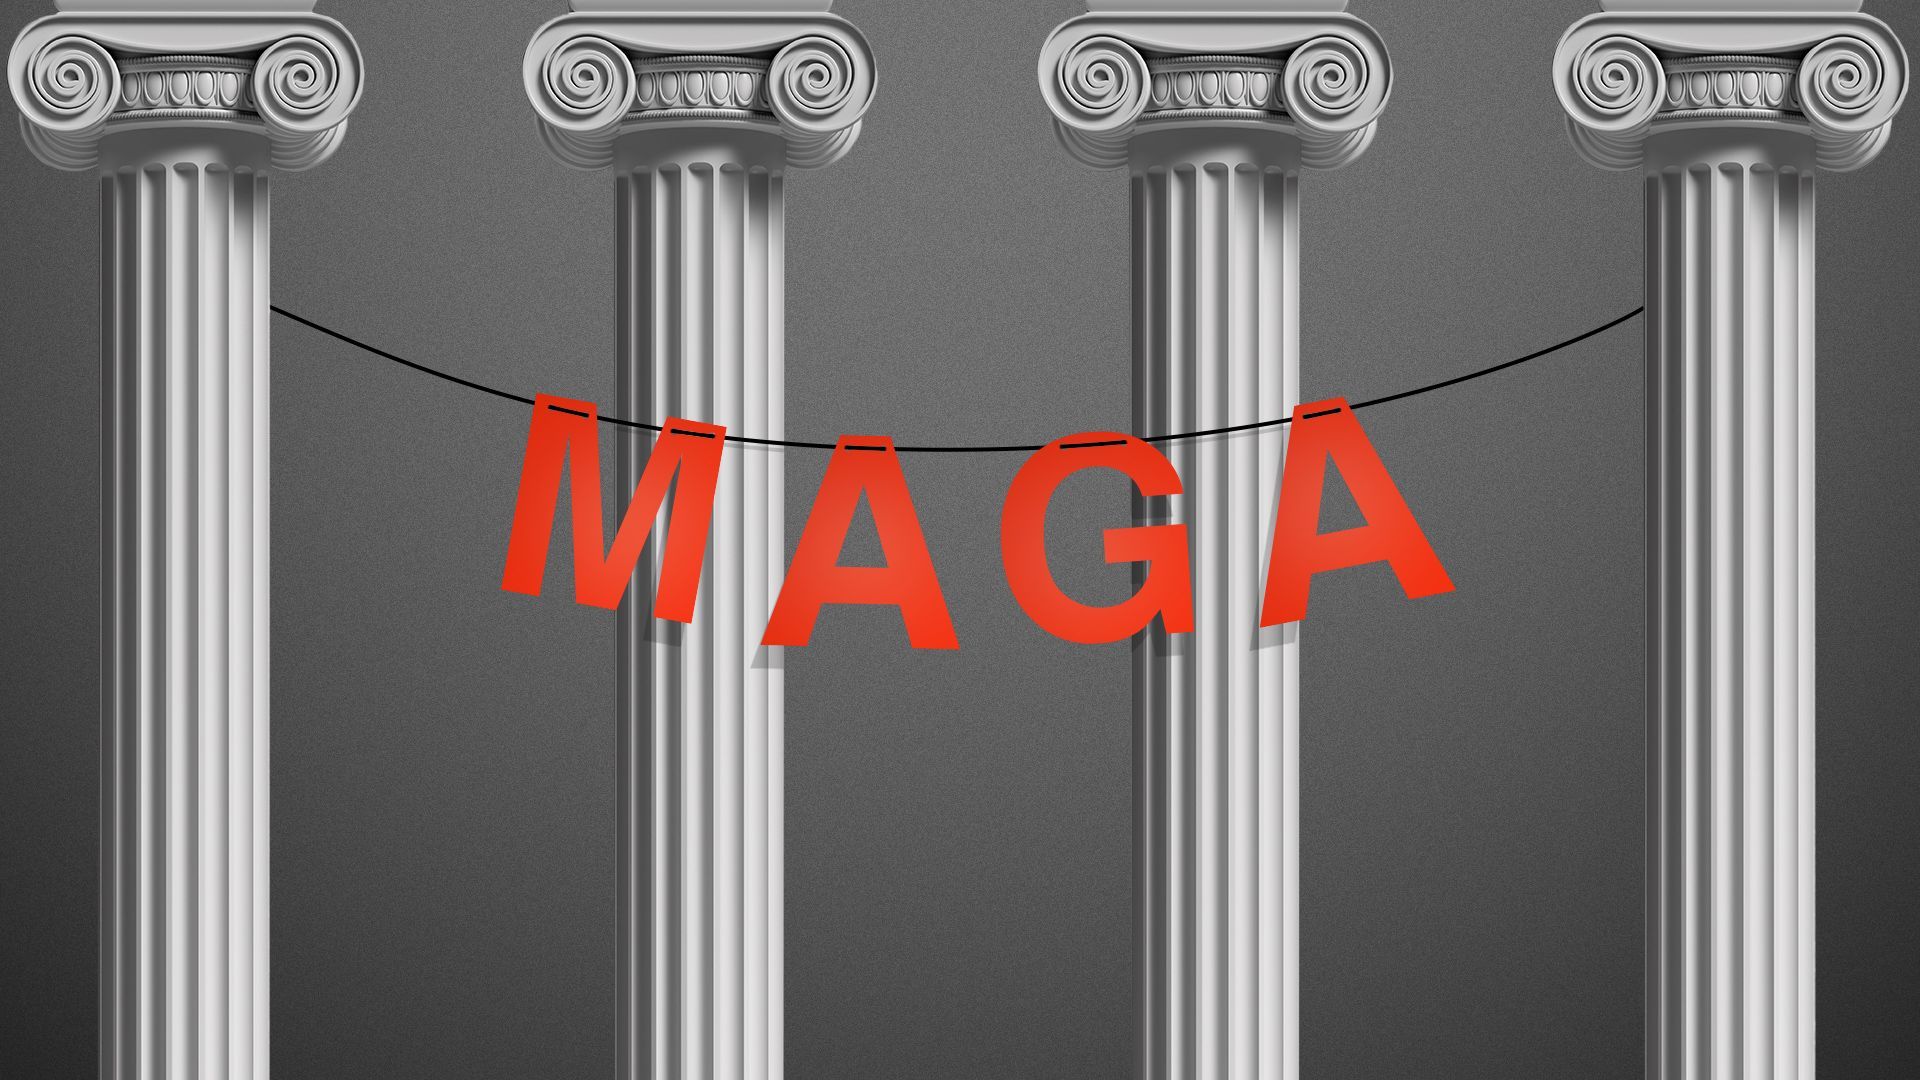 Illustration of a letter style banner spelling out "MAGA" hung across several columns. 